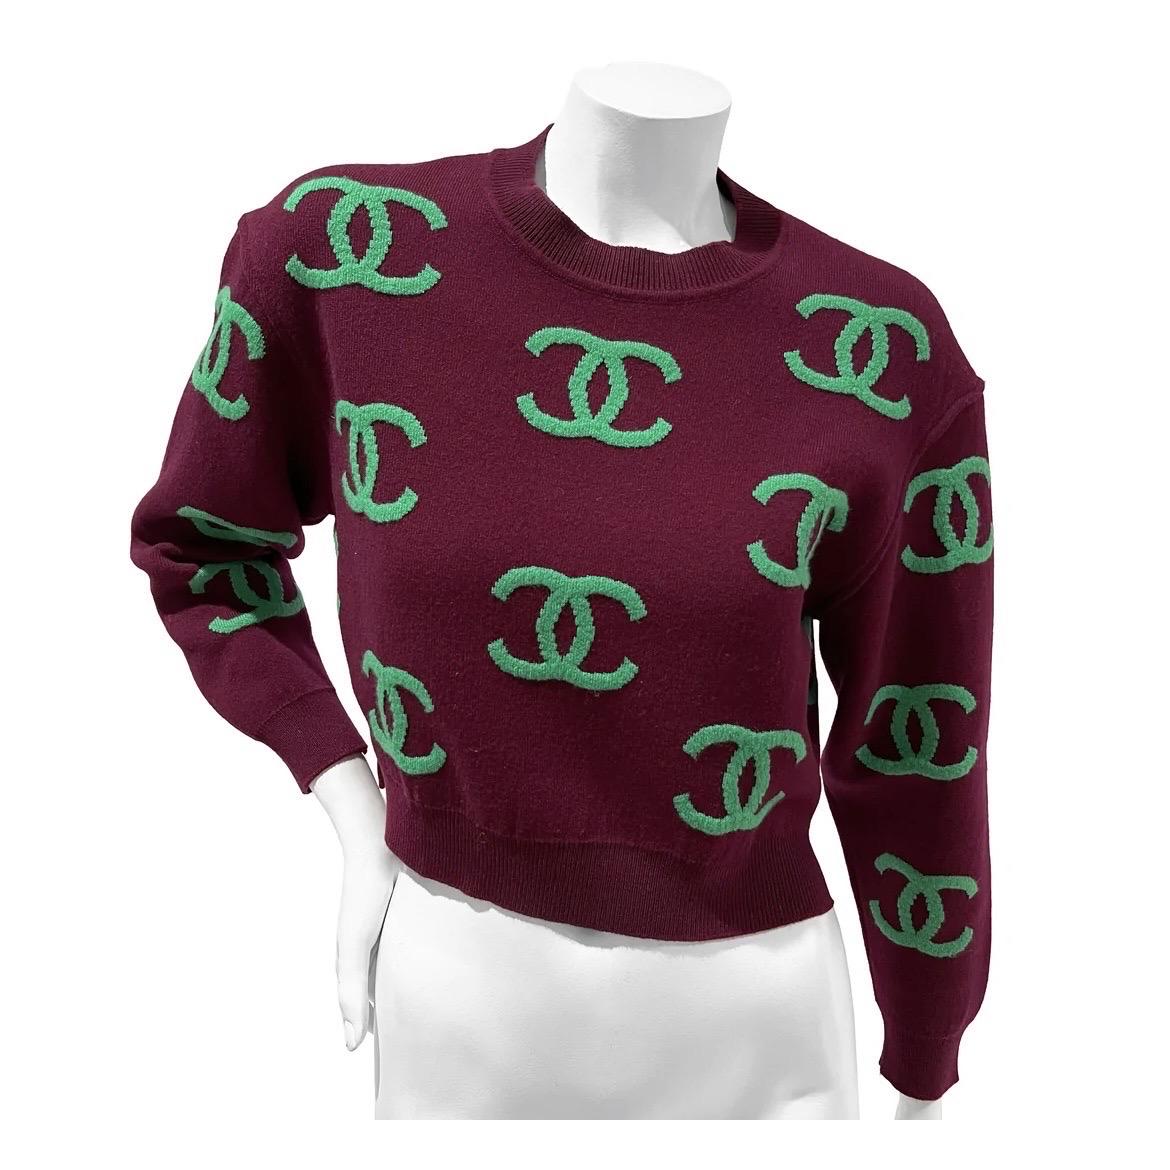 Maroon with Green CC Logo Print Cashmere Sweater by Chanel
Spring 2021
Made in Italy
Maroon with green CC logo print detail
Long sleeve
Slip-on
Crew neck 
Ribbed elastic bottom hem with dual side slit detail
Fabric Condition; 97% Cashmere, 3%